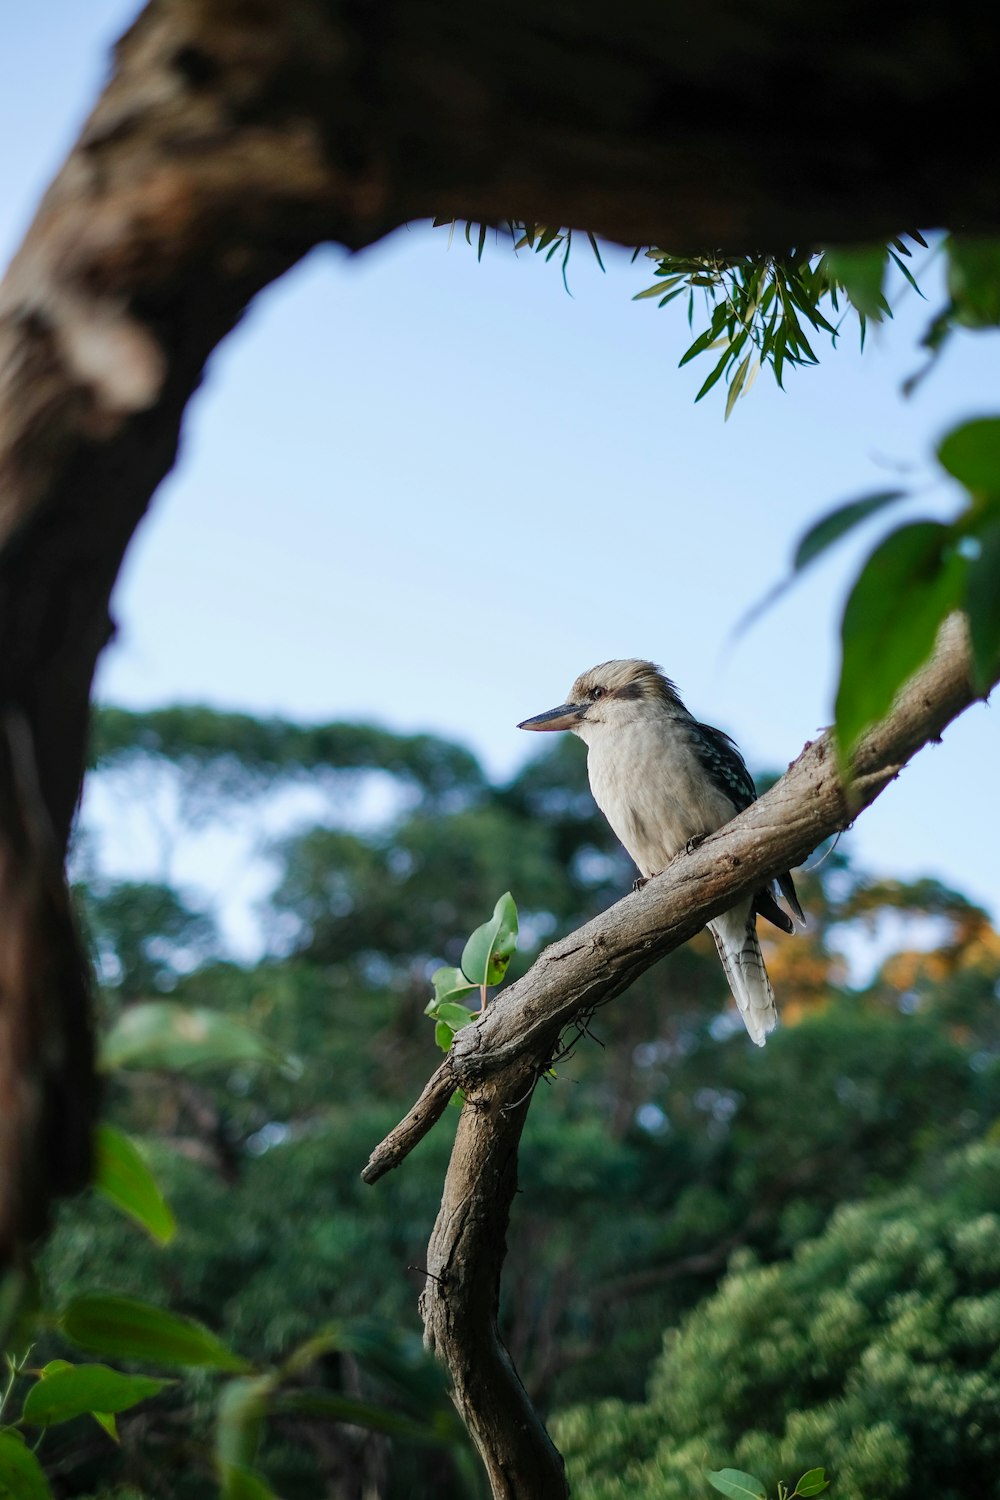 white and gray bird on tree branch during daytime